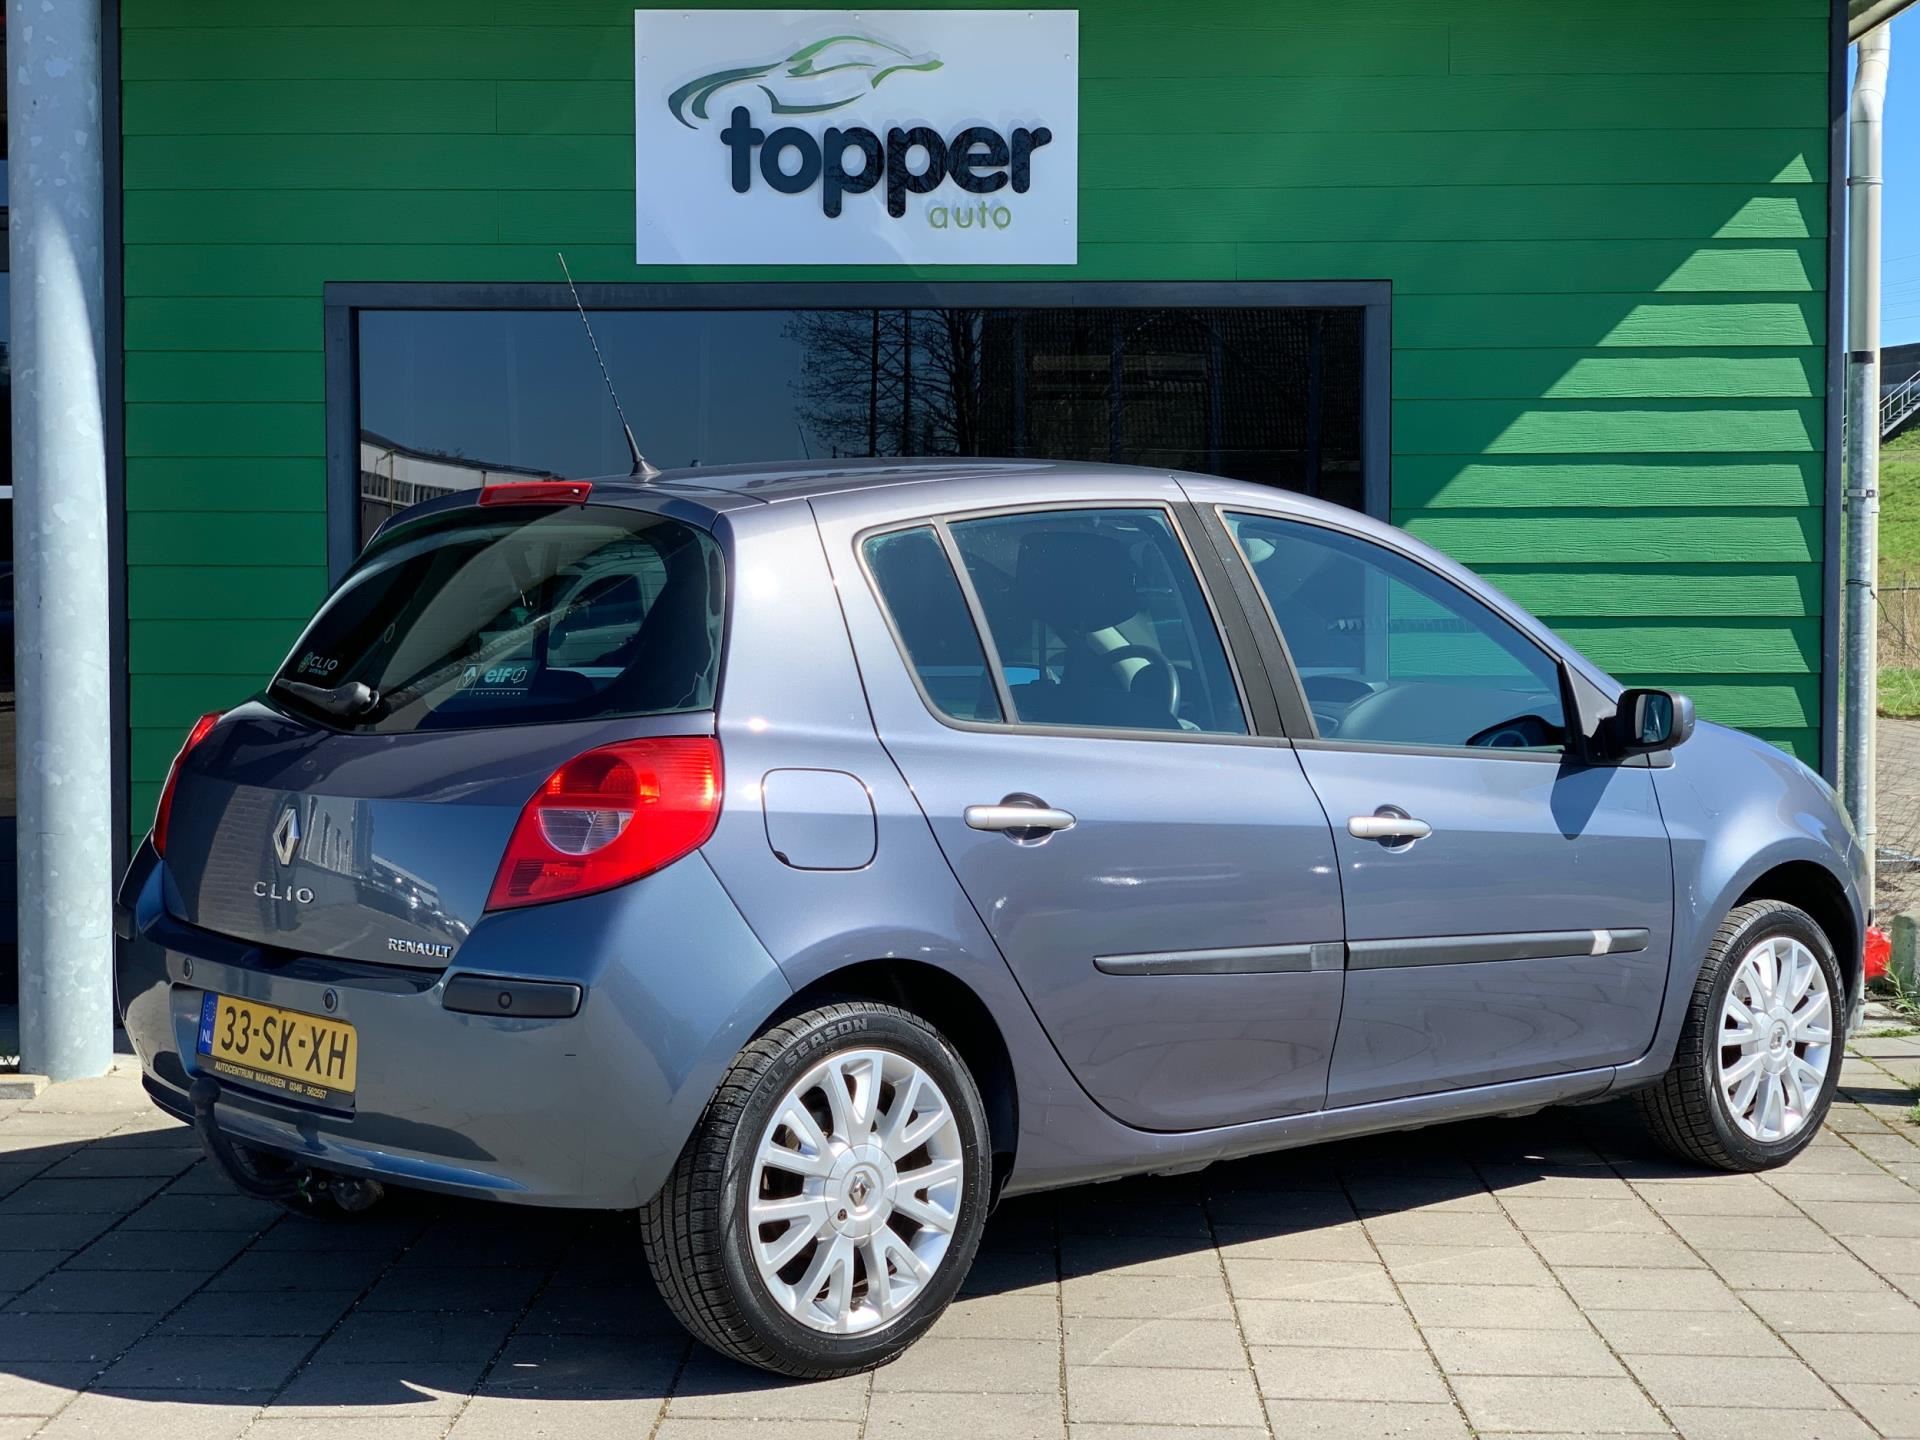 Renault Clio - 16V Dynamique Luxe / StoelVw./ Cruise Benzine uit 2006 - www.topperauto.nl